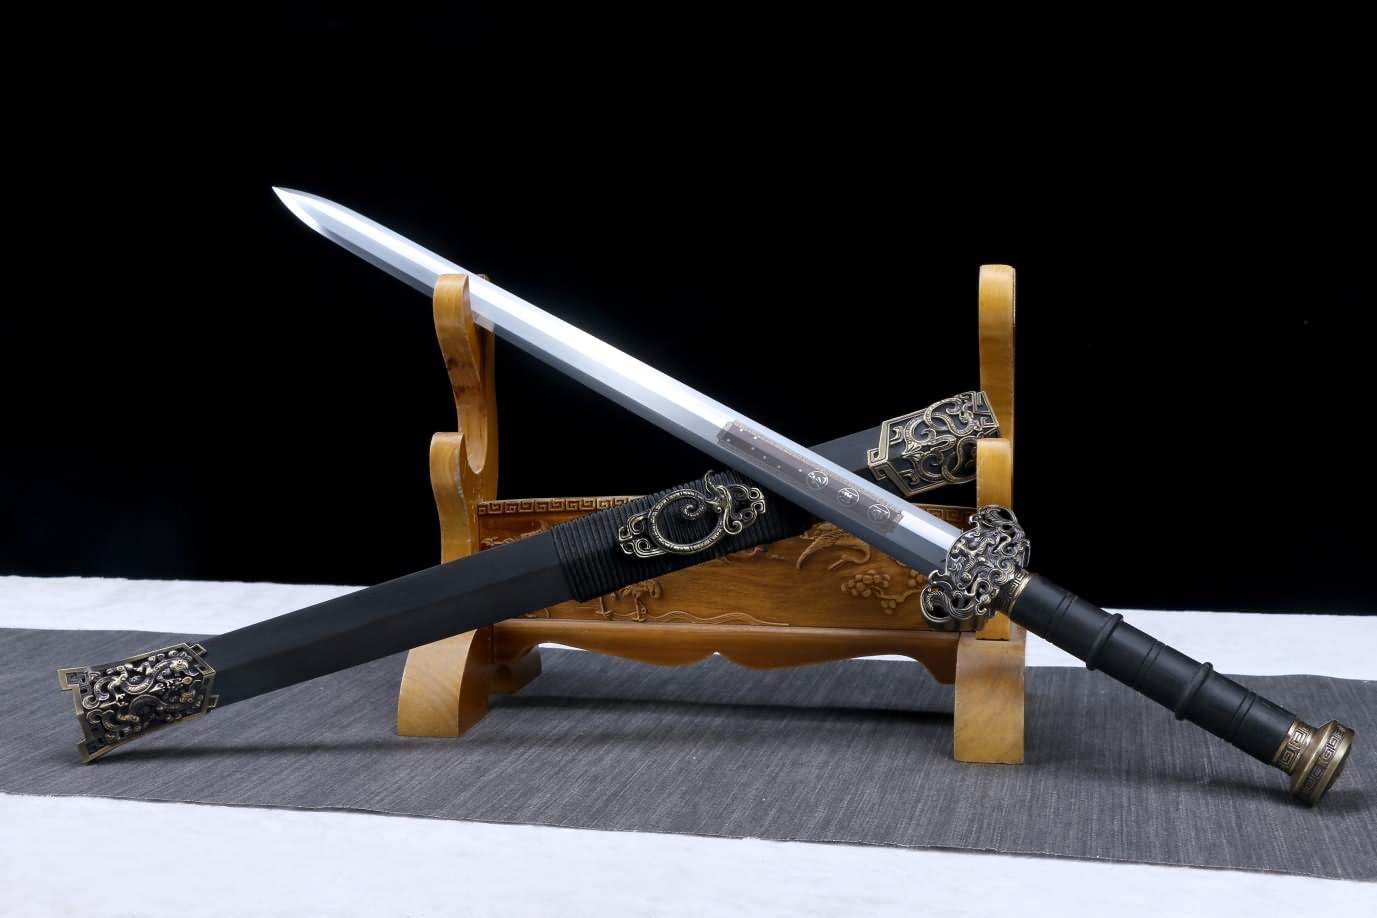 Seven Star Longquan Sword,Battle Ready,High Carbon steel blade,Alloy Fittings,chinese swords